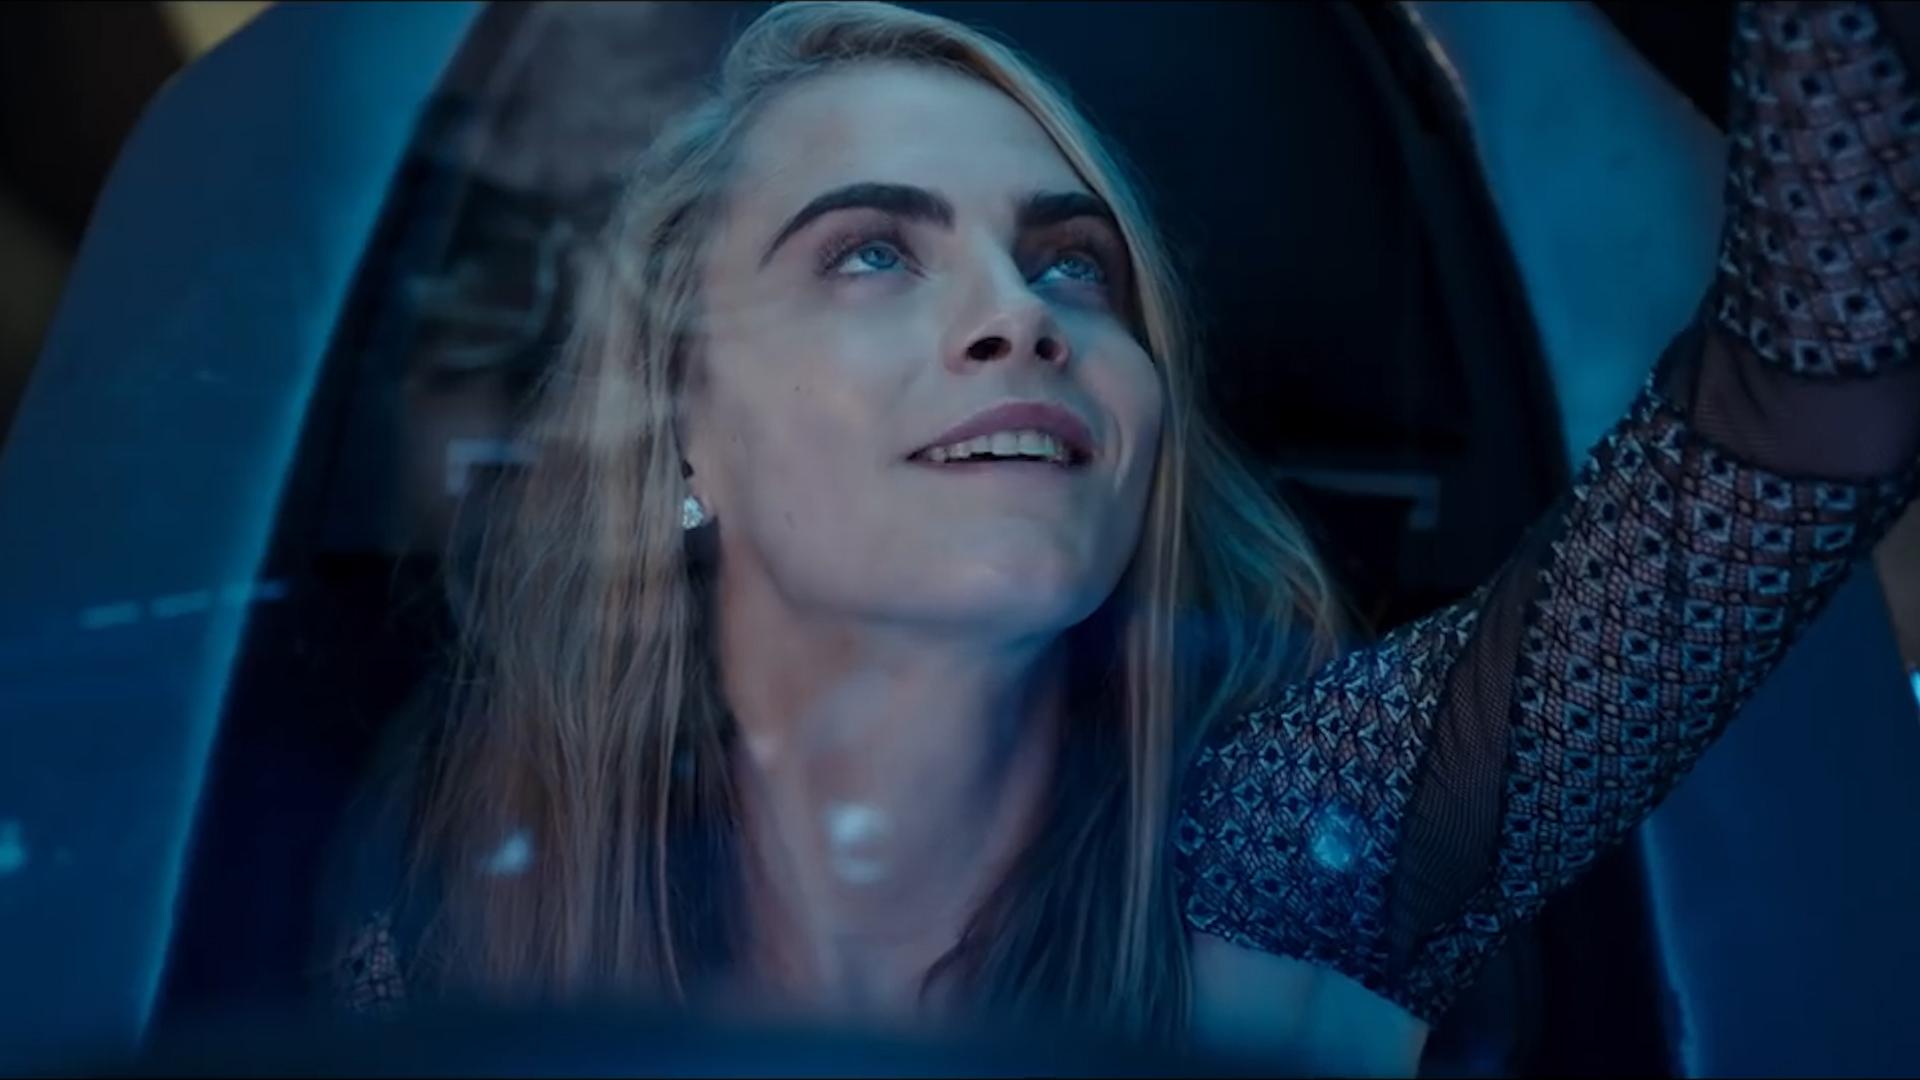 Cara Delevingne As Laureline In Valerian And The City Of A Thousand Planets Wallpapers